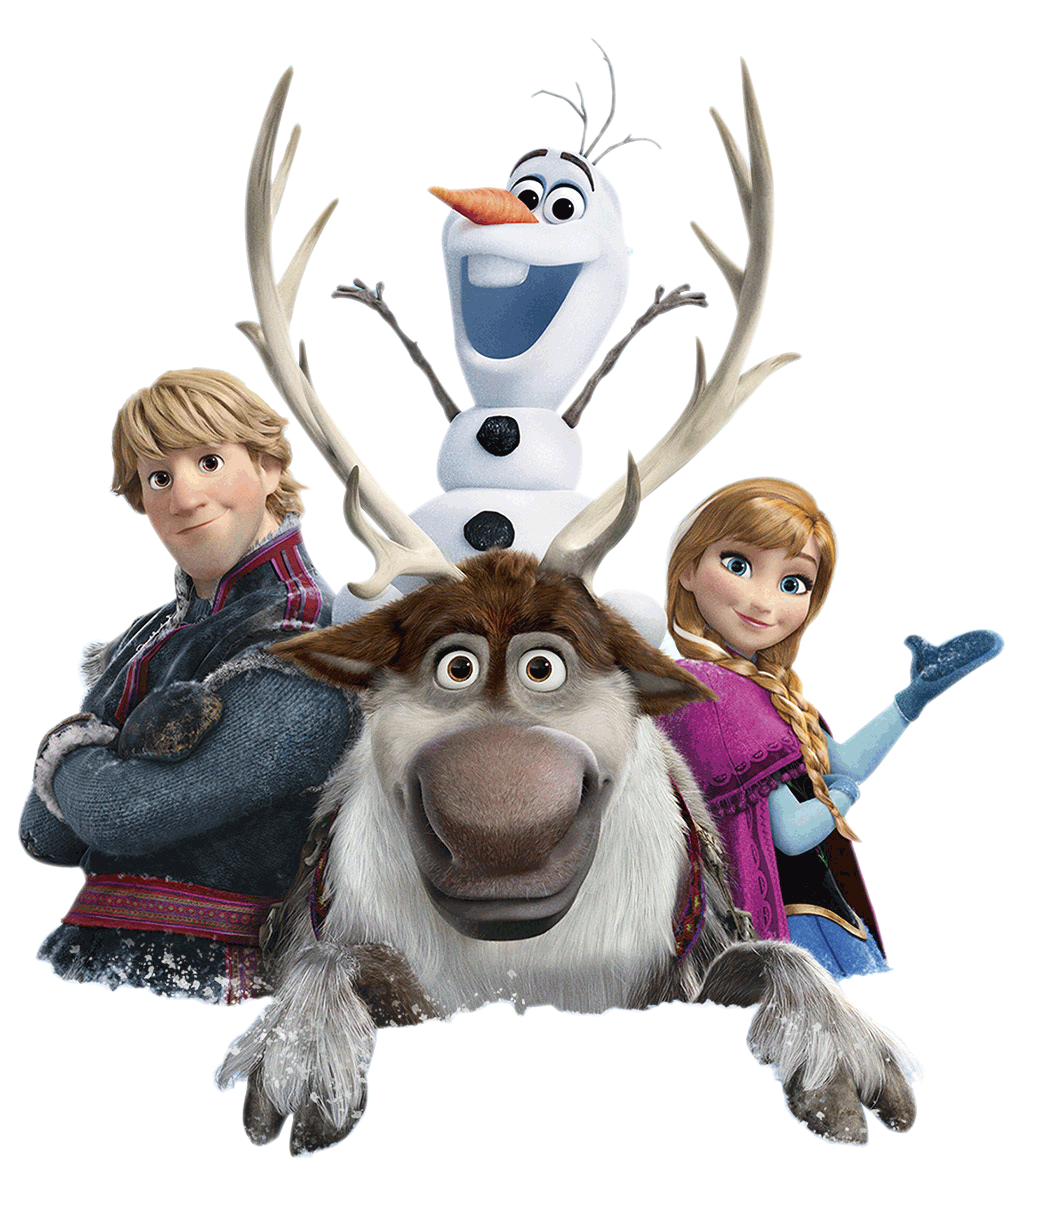 Download PNG image - Frozen Characters PNG Image 